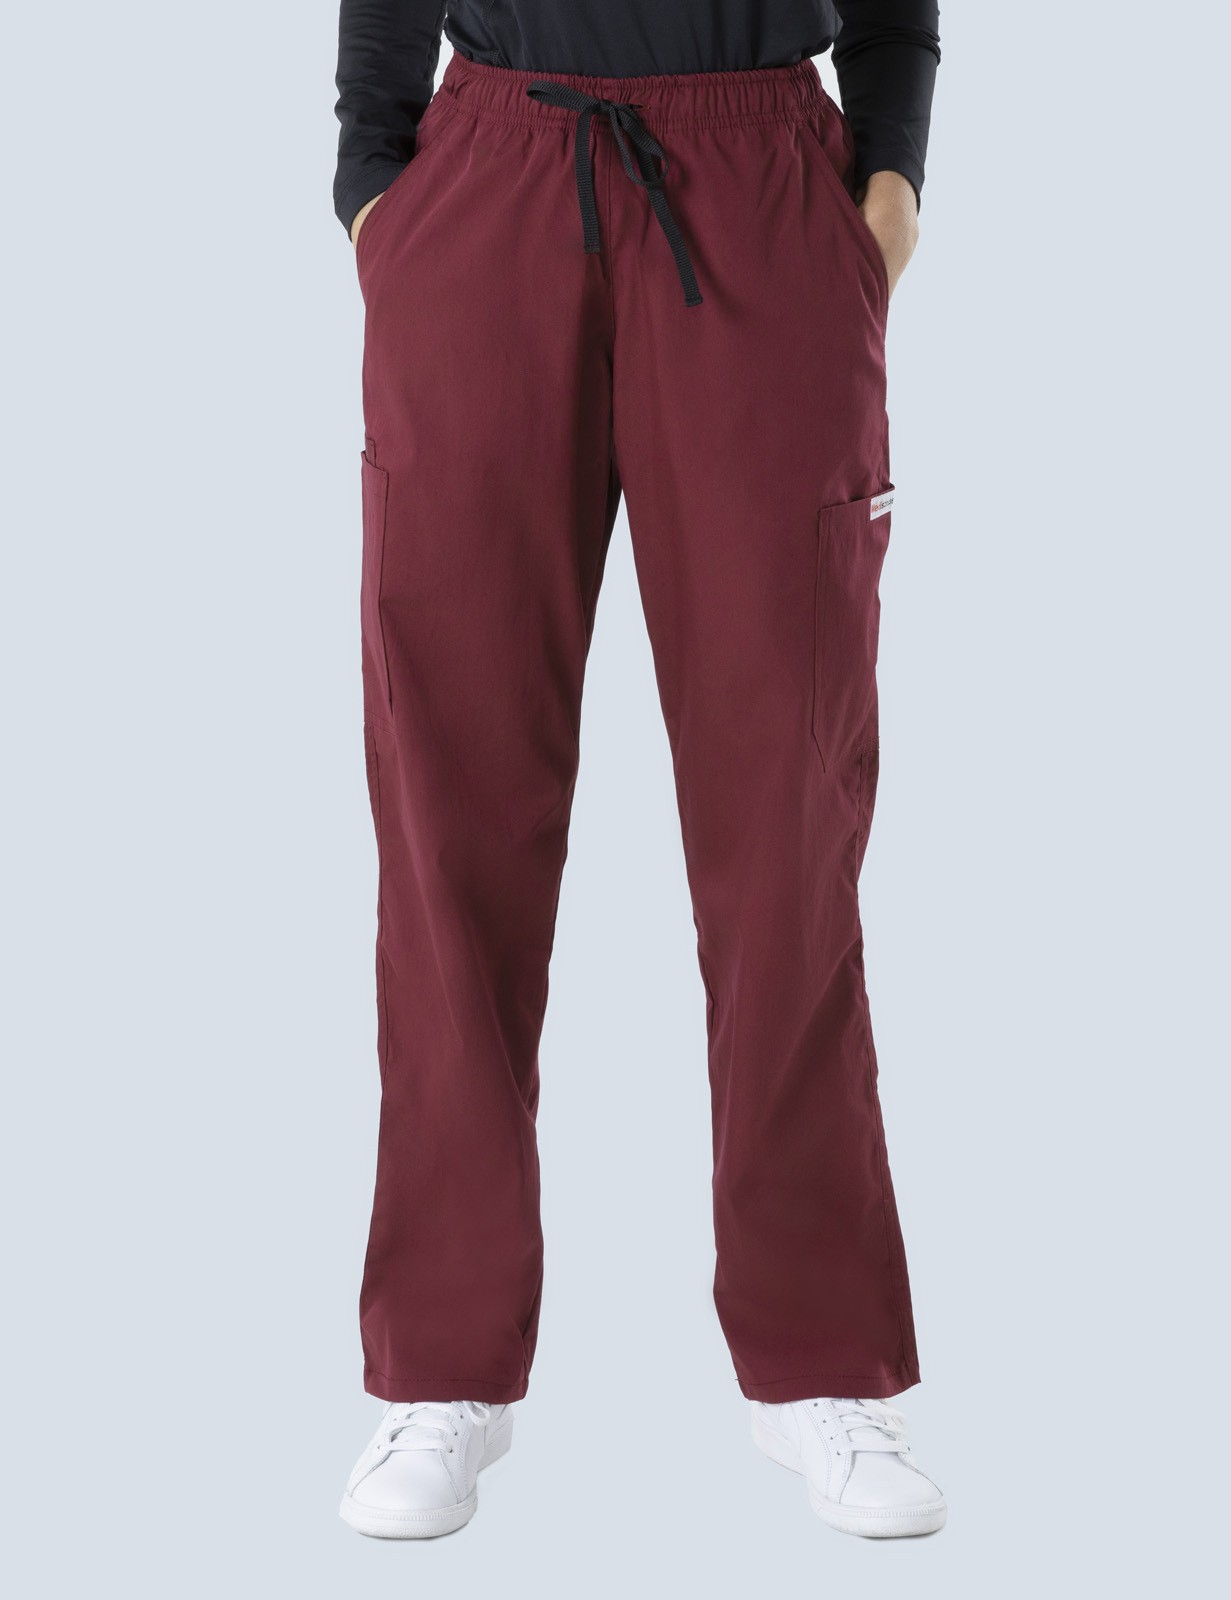 Innisfail Hospital - ED RIP RN (Women's Fit Solid Scrub Top and Cargo Pants in Burgundy incl Logos)